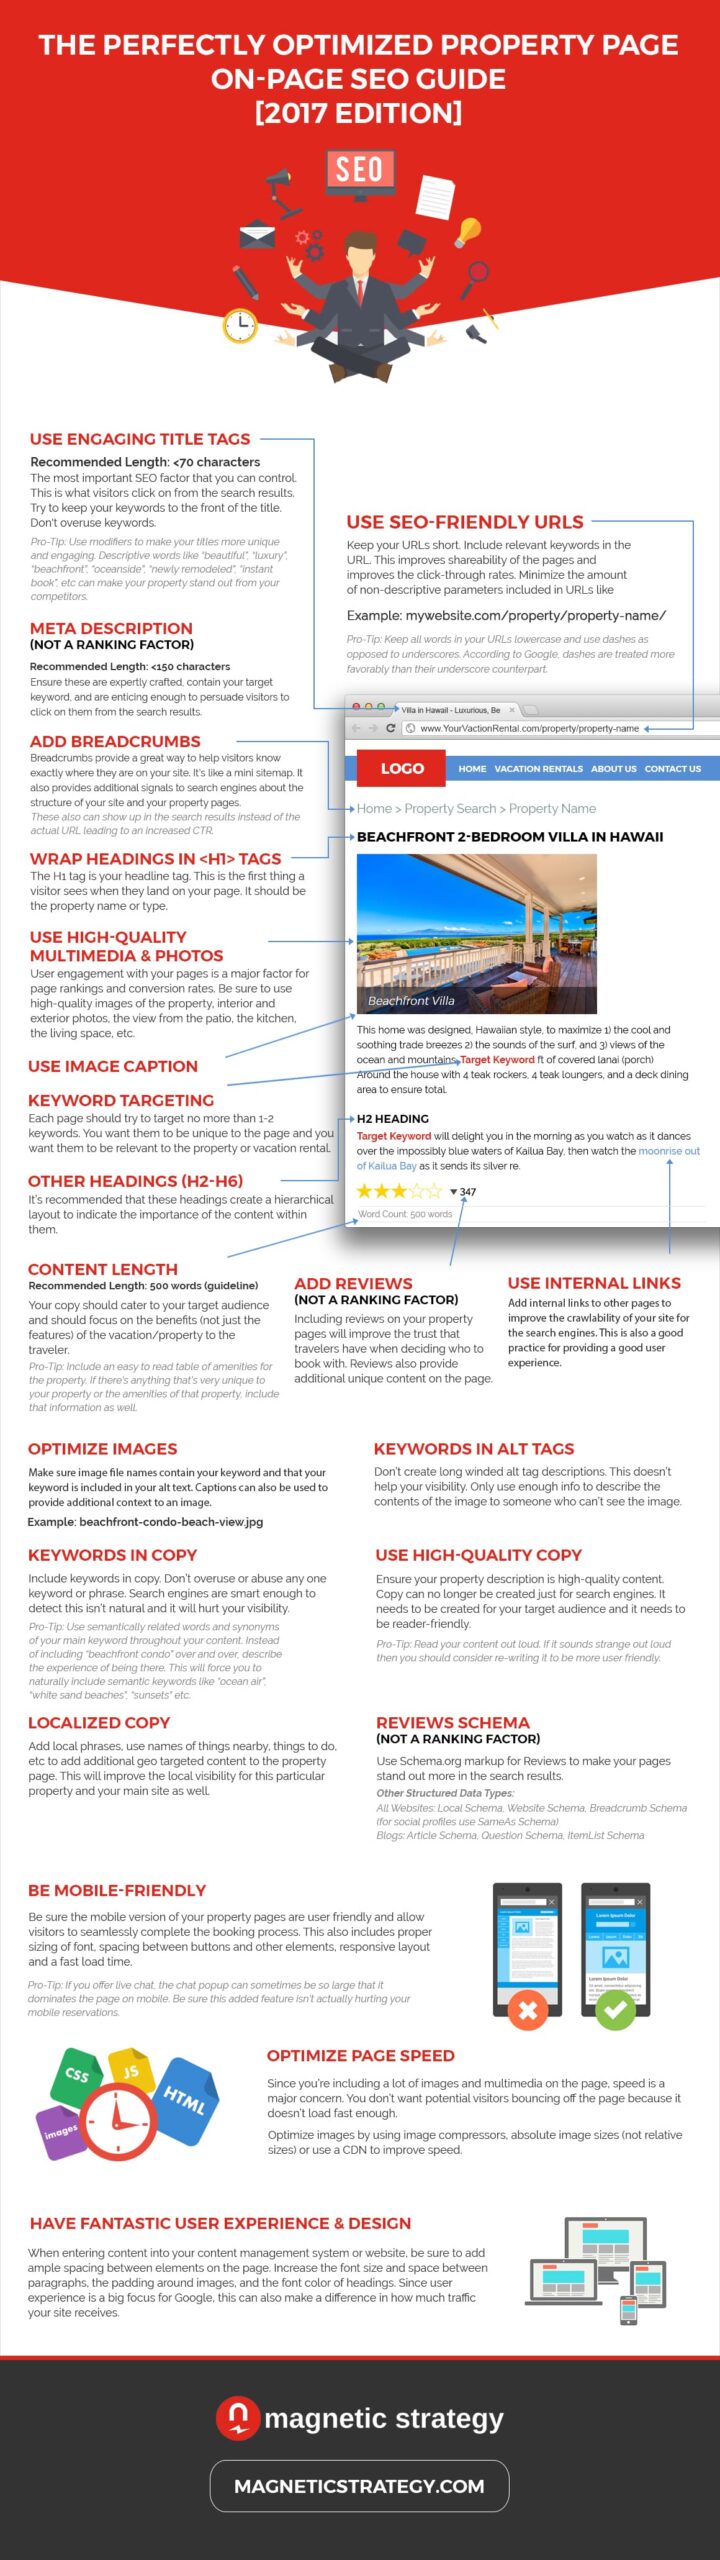 On Page SEO Guide Infographic min v2 scaled